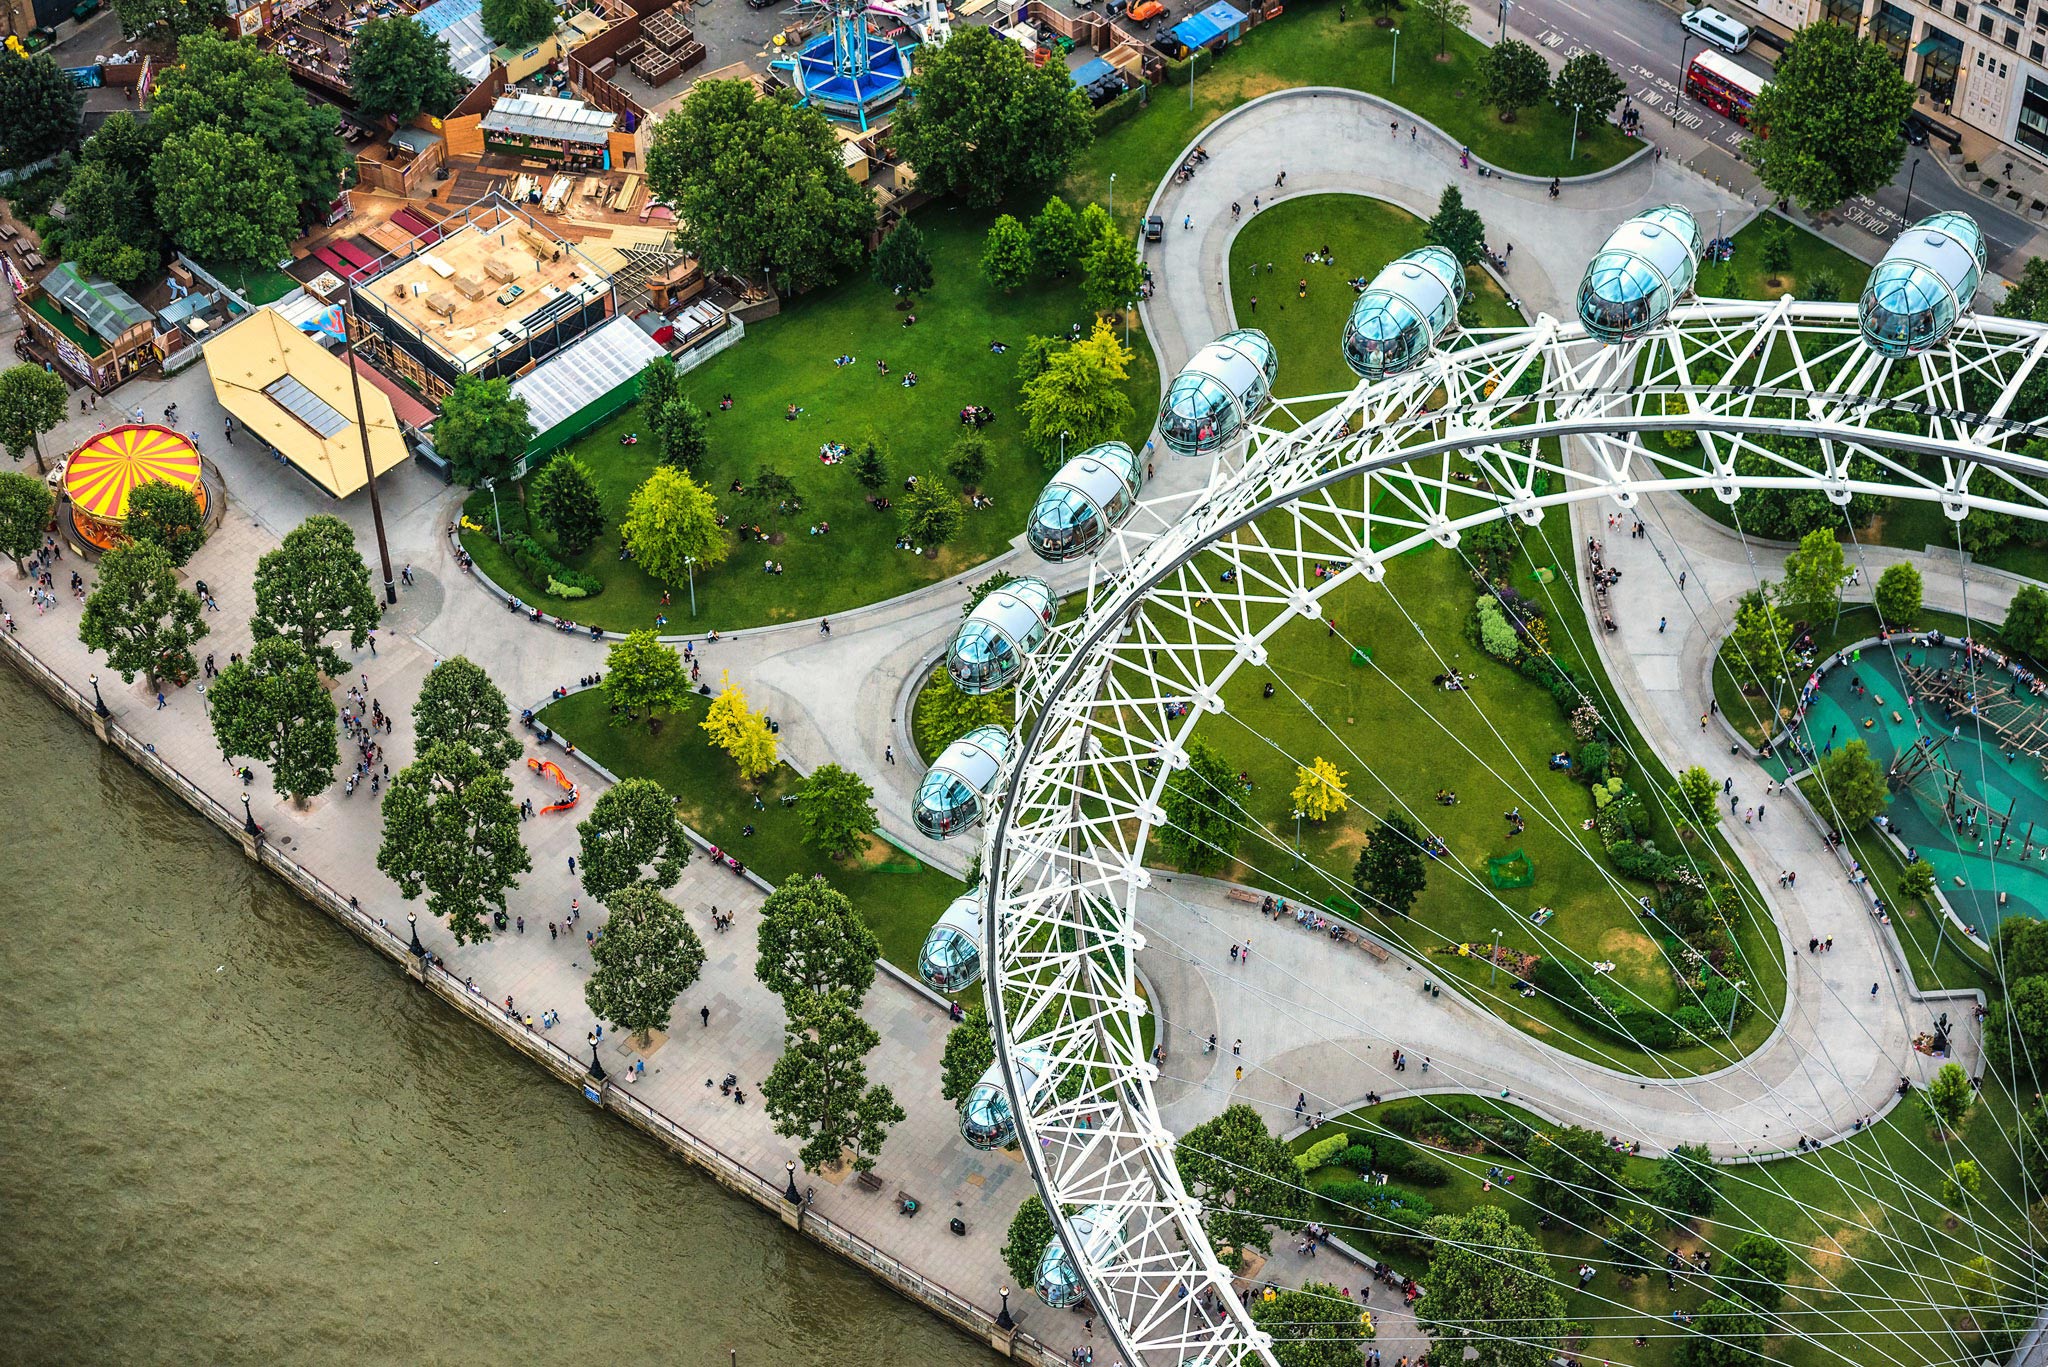 Aerial photograph of the London Eye captured by Wright Content from a helicopter. The camera looks down onto the iconic landmark, offering a unique perspective of the attraction and its surrounding parks on the South Bank.